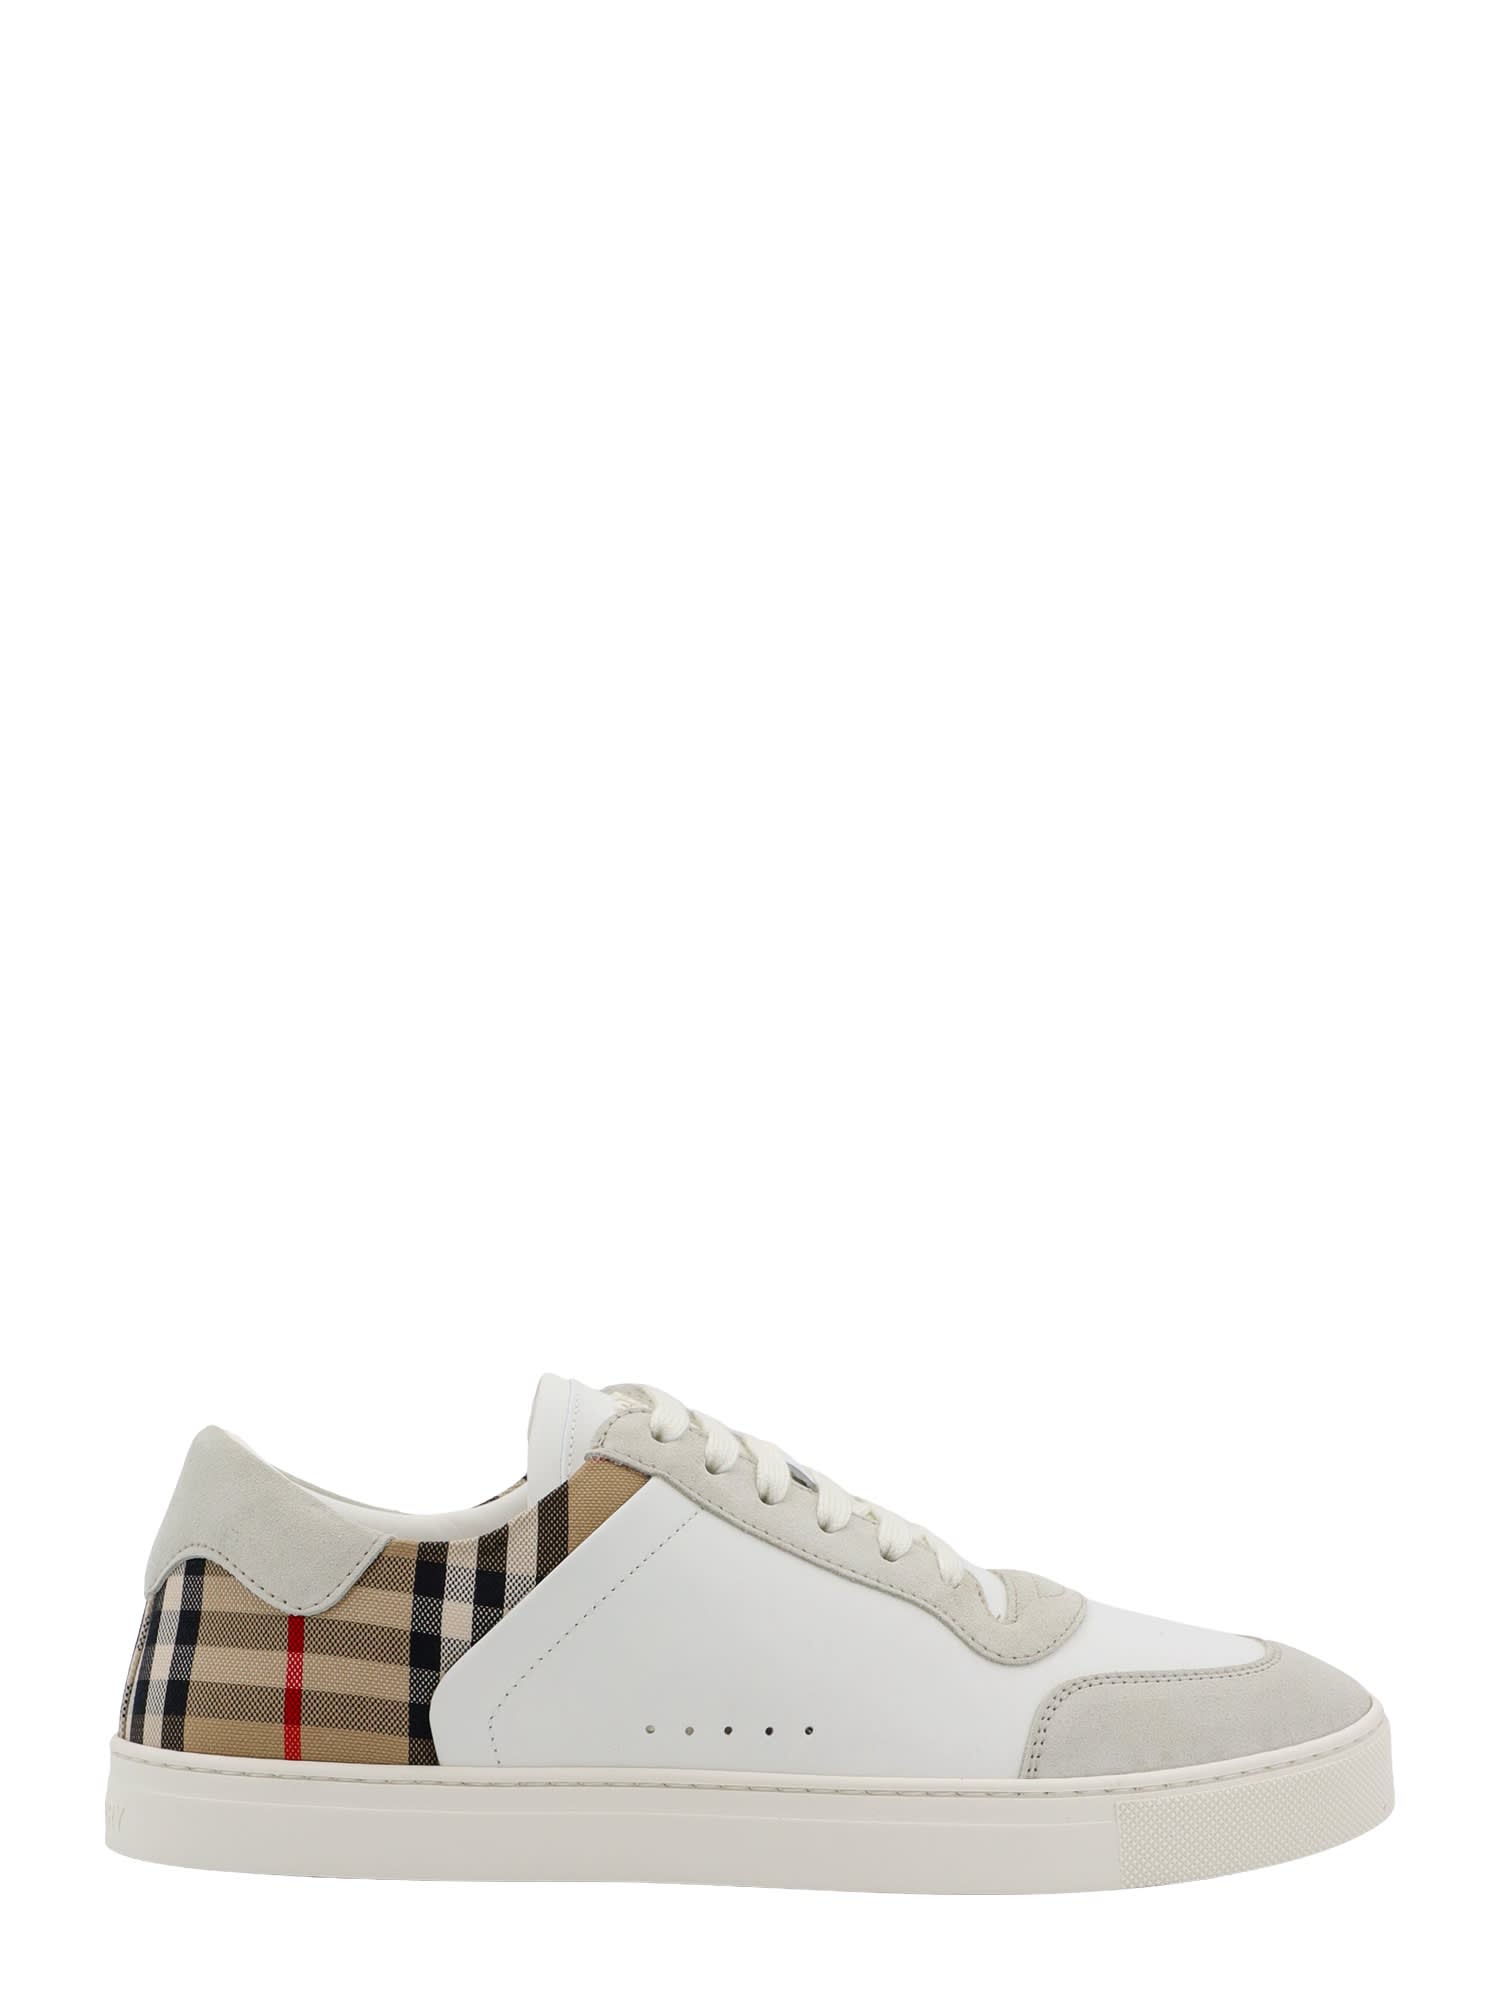 Burberry Multicolor Suede And Leather Sneakers